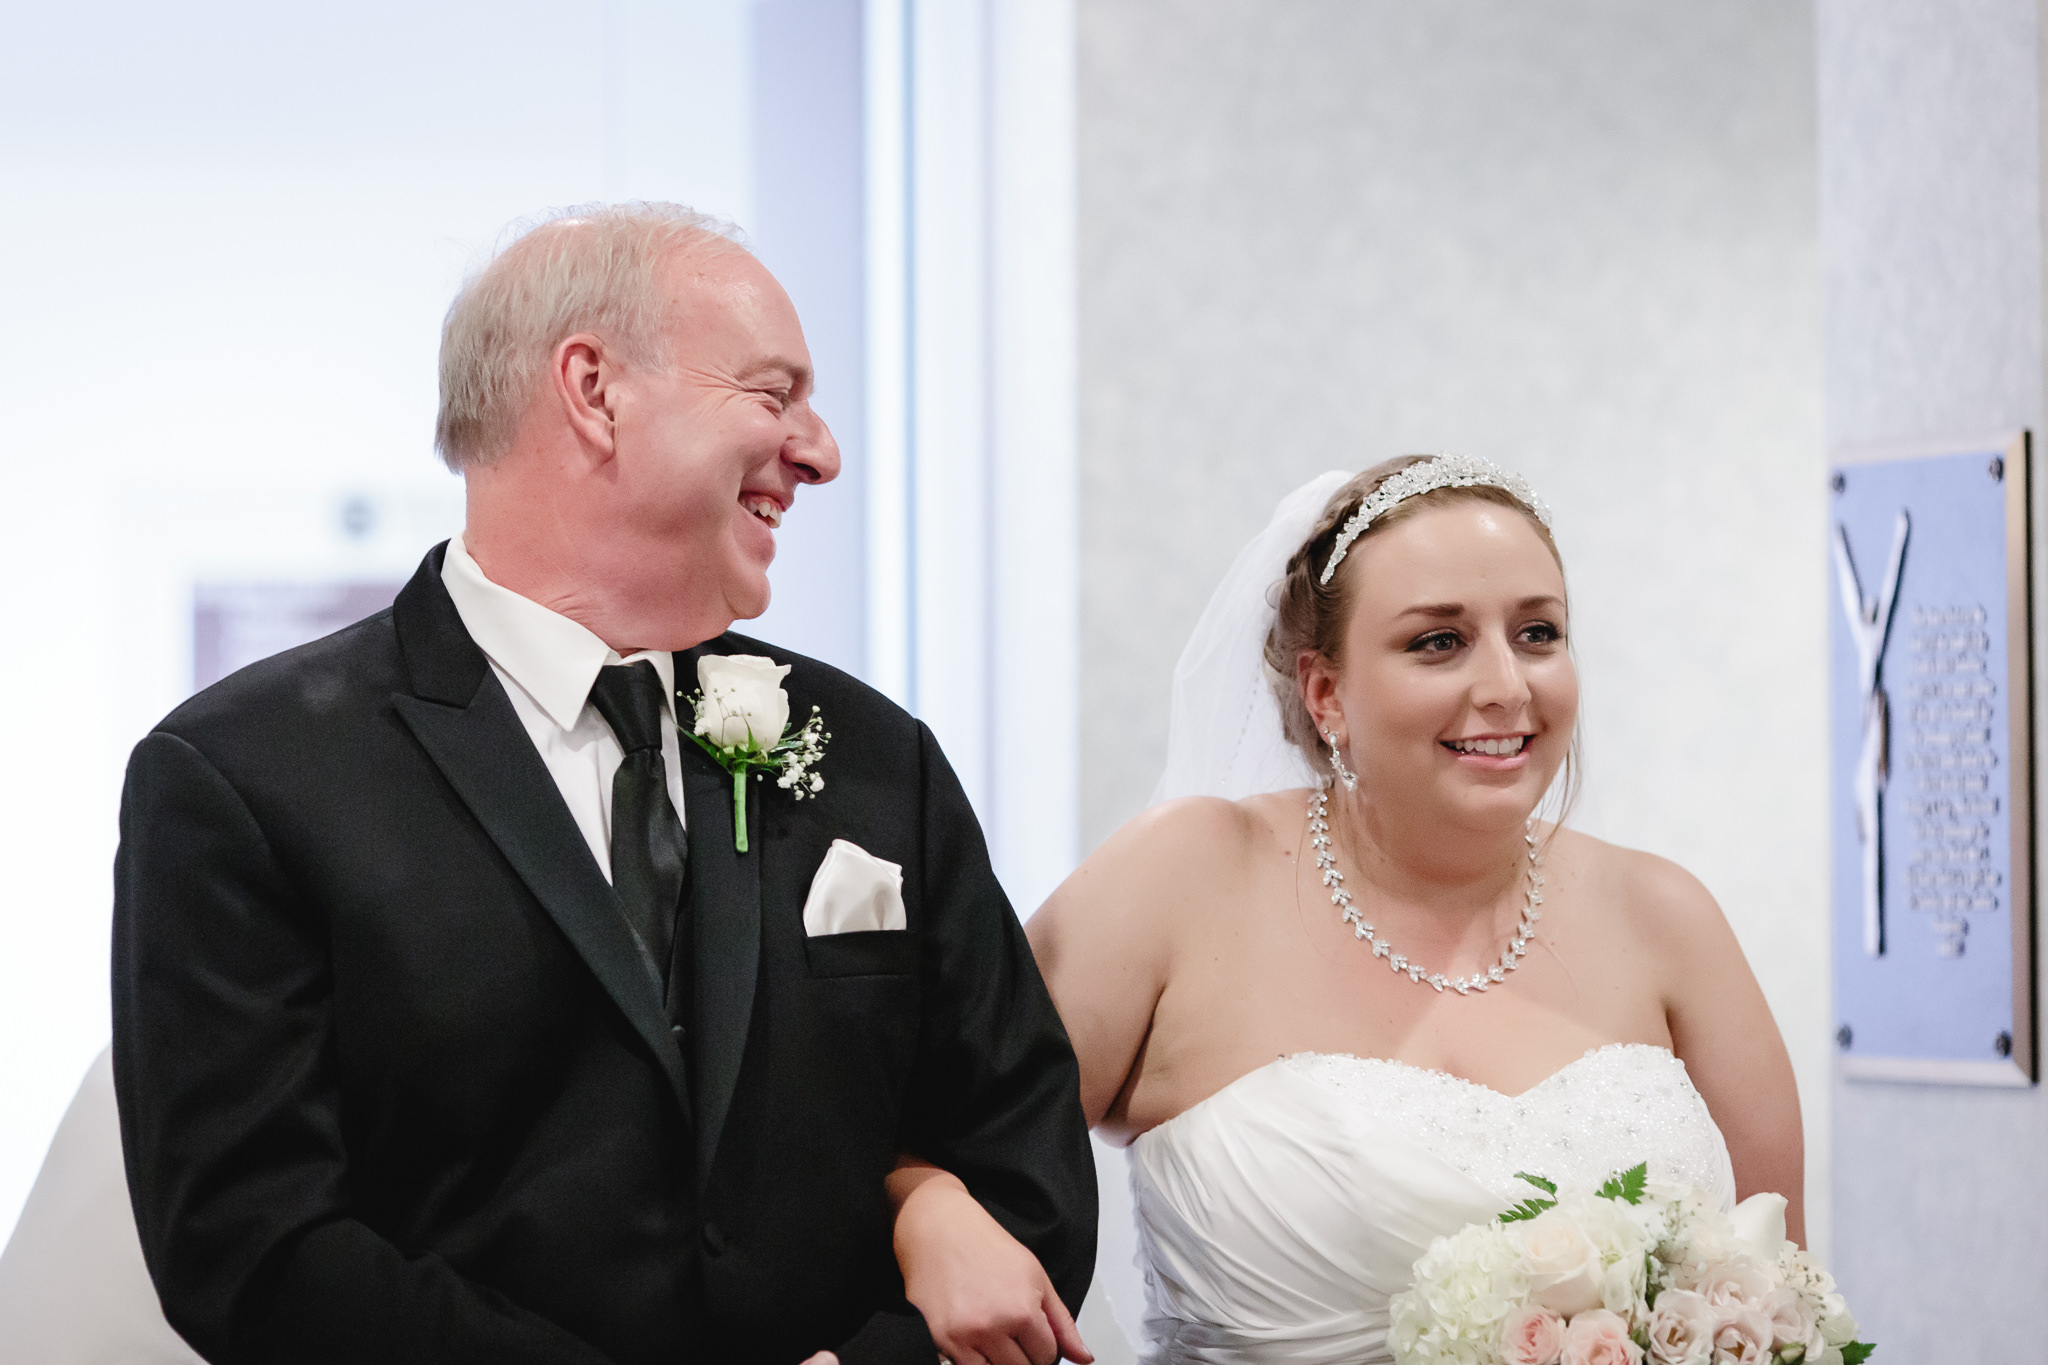 Father of the bride smiles at his daughter before walking down the aisle